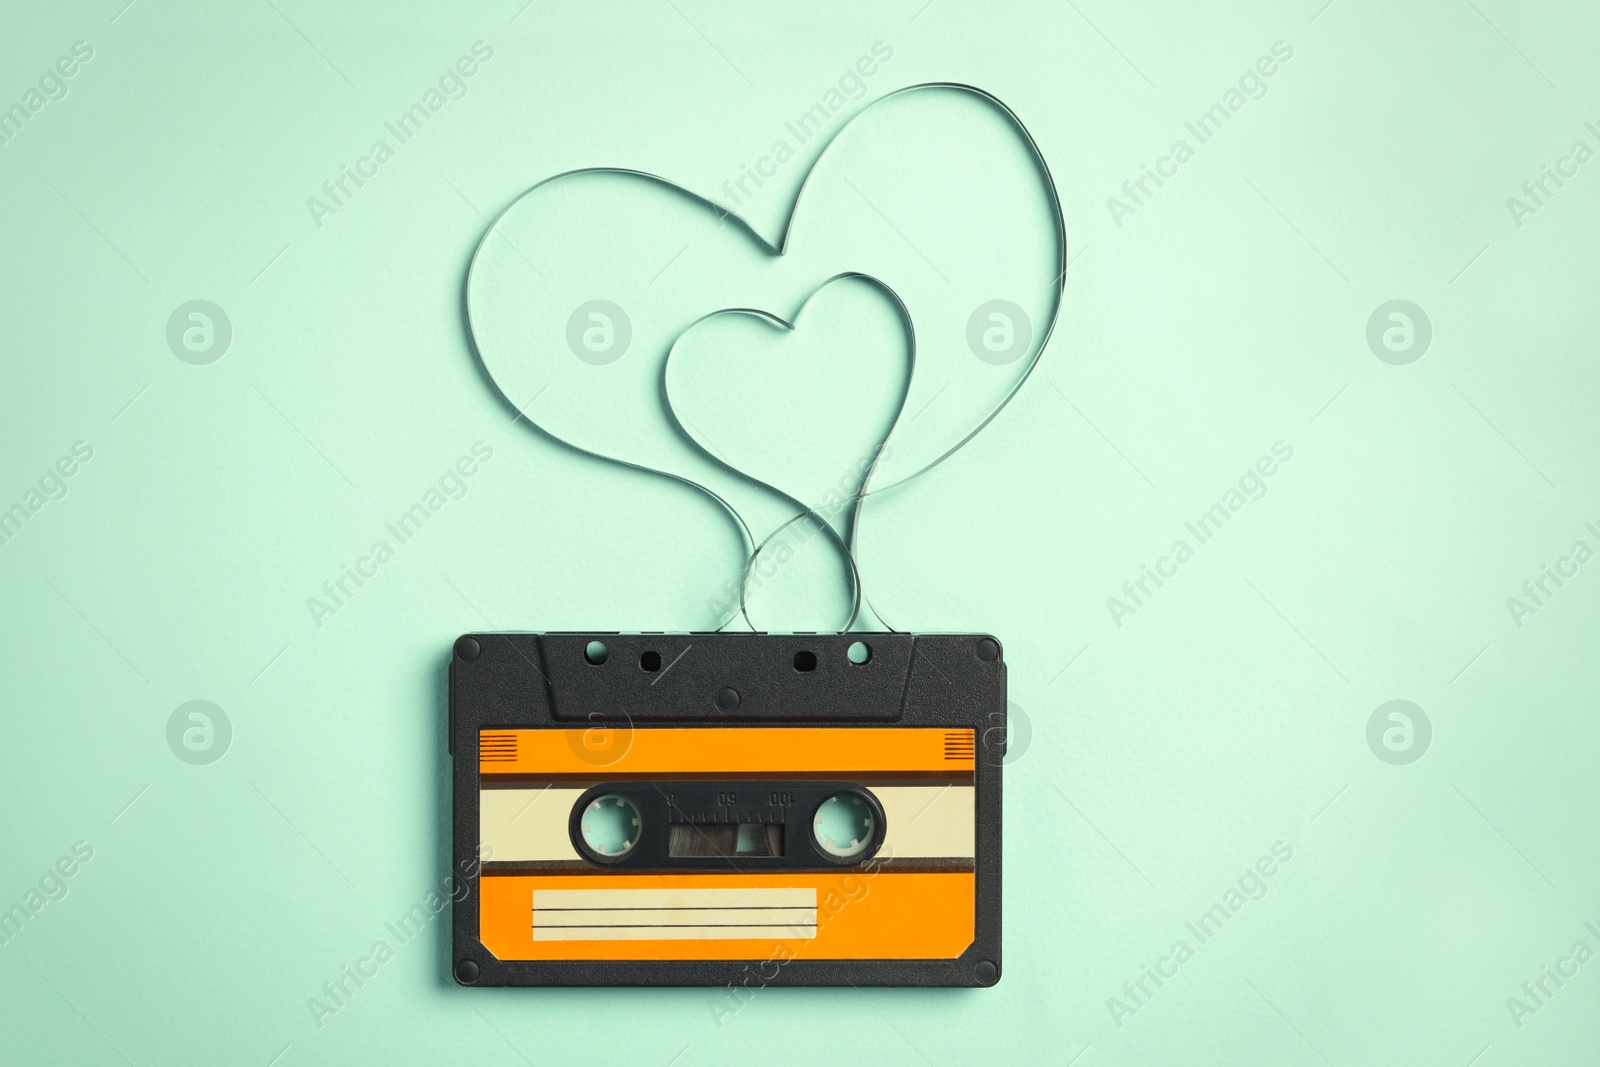 Photo of Music cassette and hearts made with tape on turquoise background, top view. Listening love song